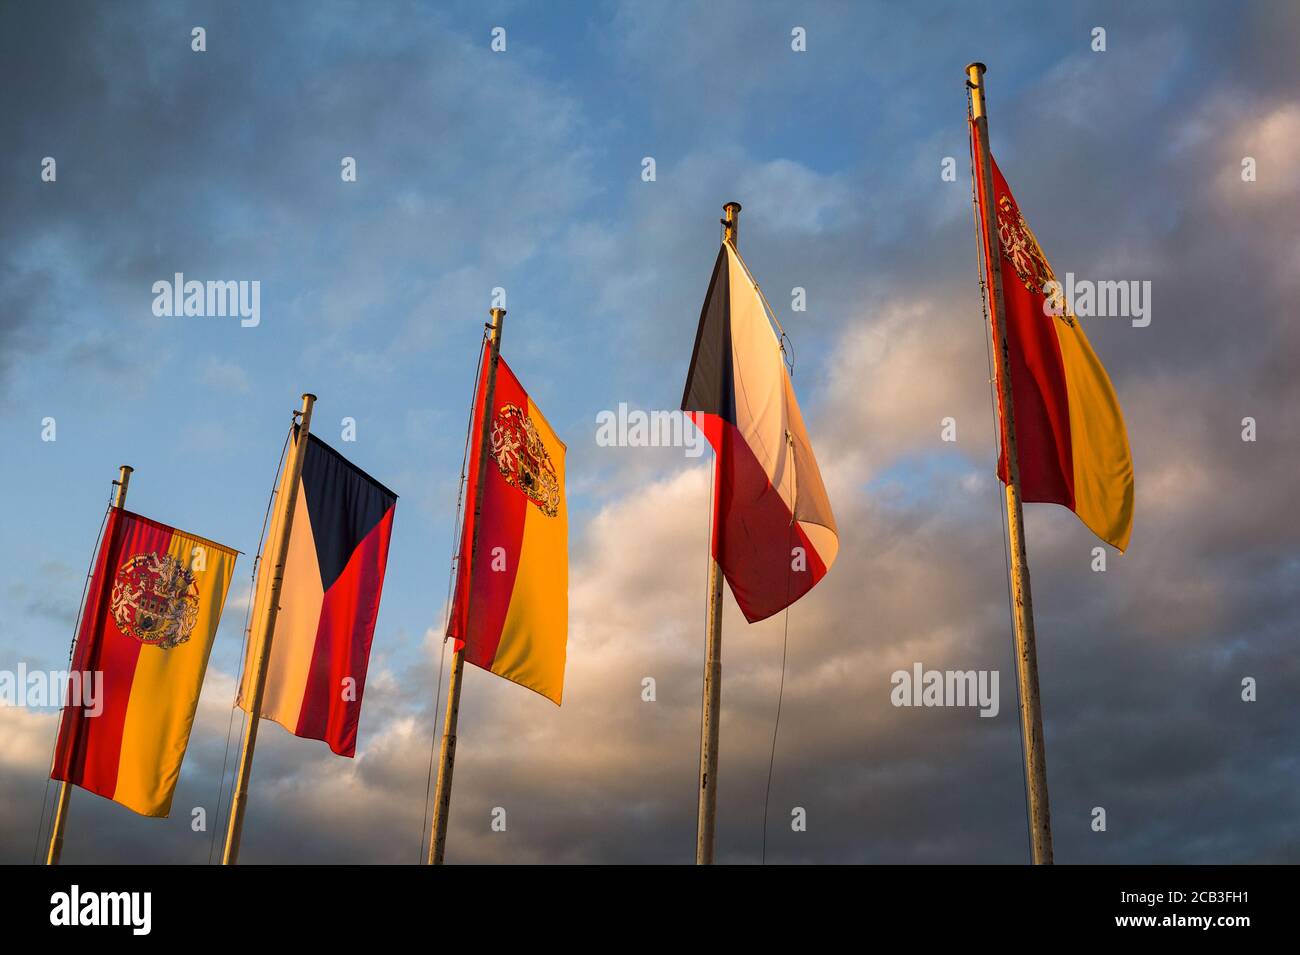 National flag of Czech Republic and Flag with coat of arms of City of Prague. Sky with dark stormy clouds in the background. Yellow evening light Stock Photo